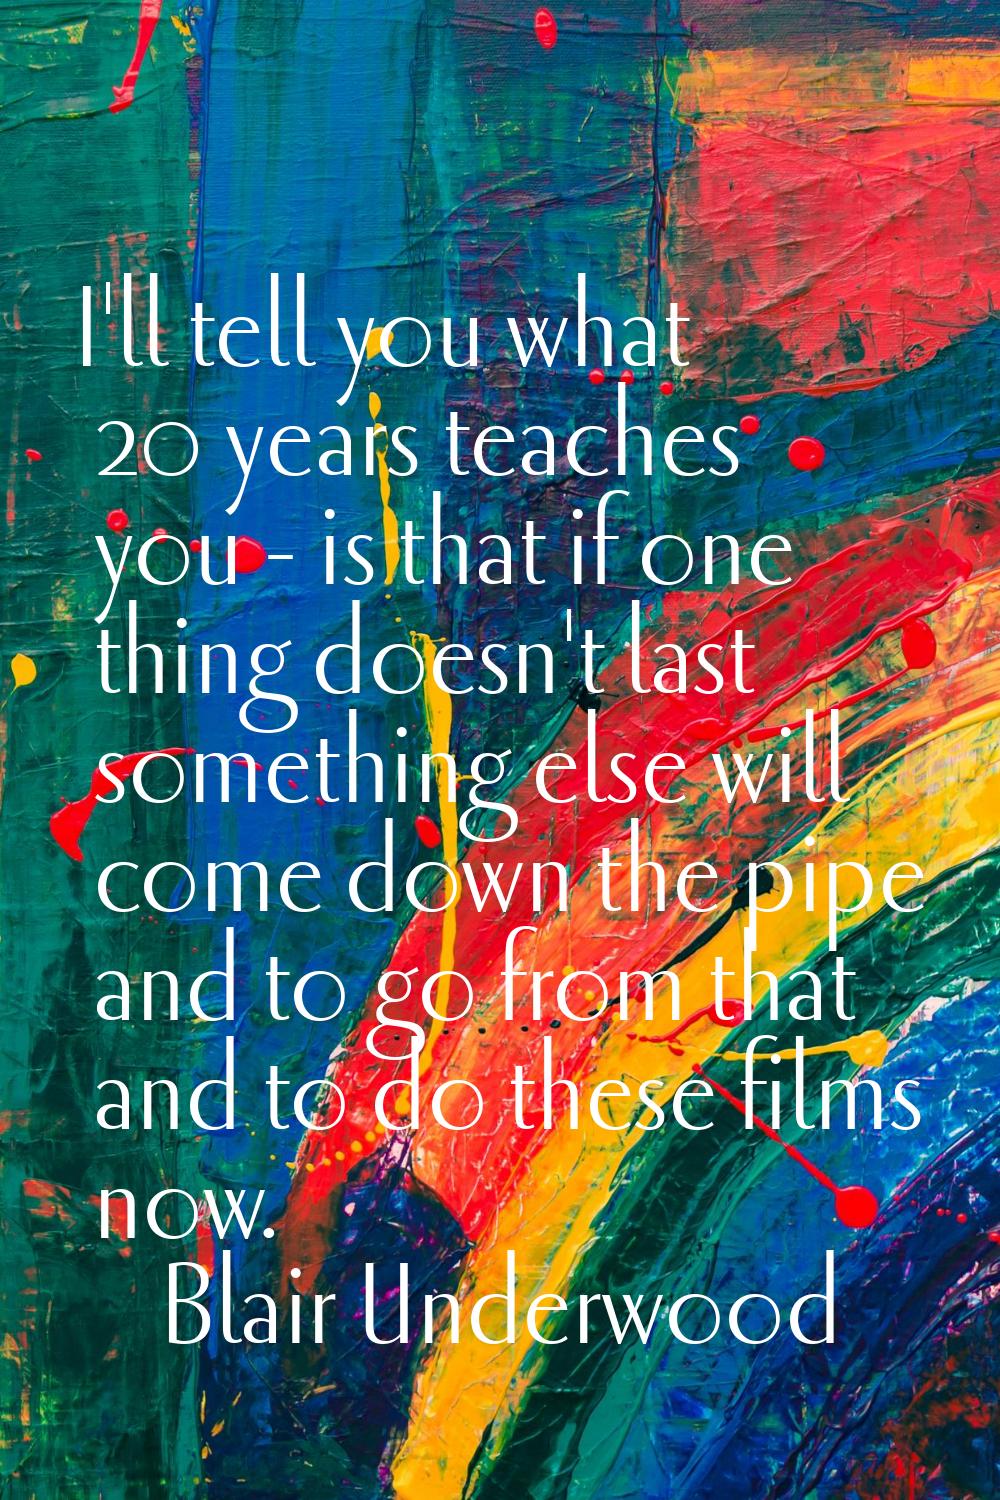 I'll tell you what 20 years teaches you - is that if one thing doesn't last something else will com